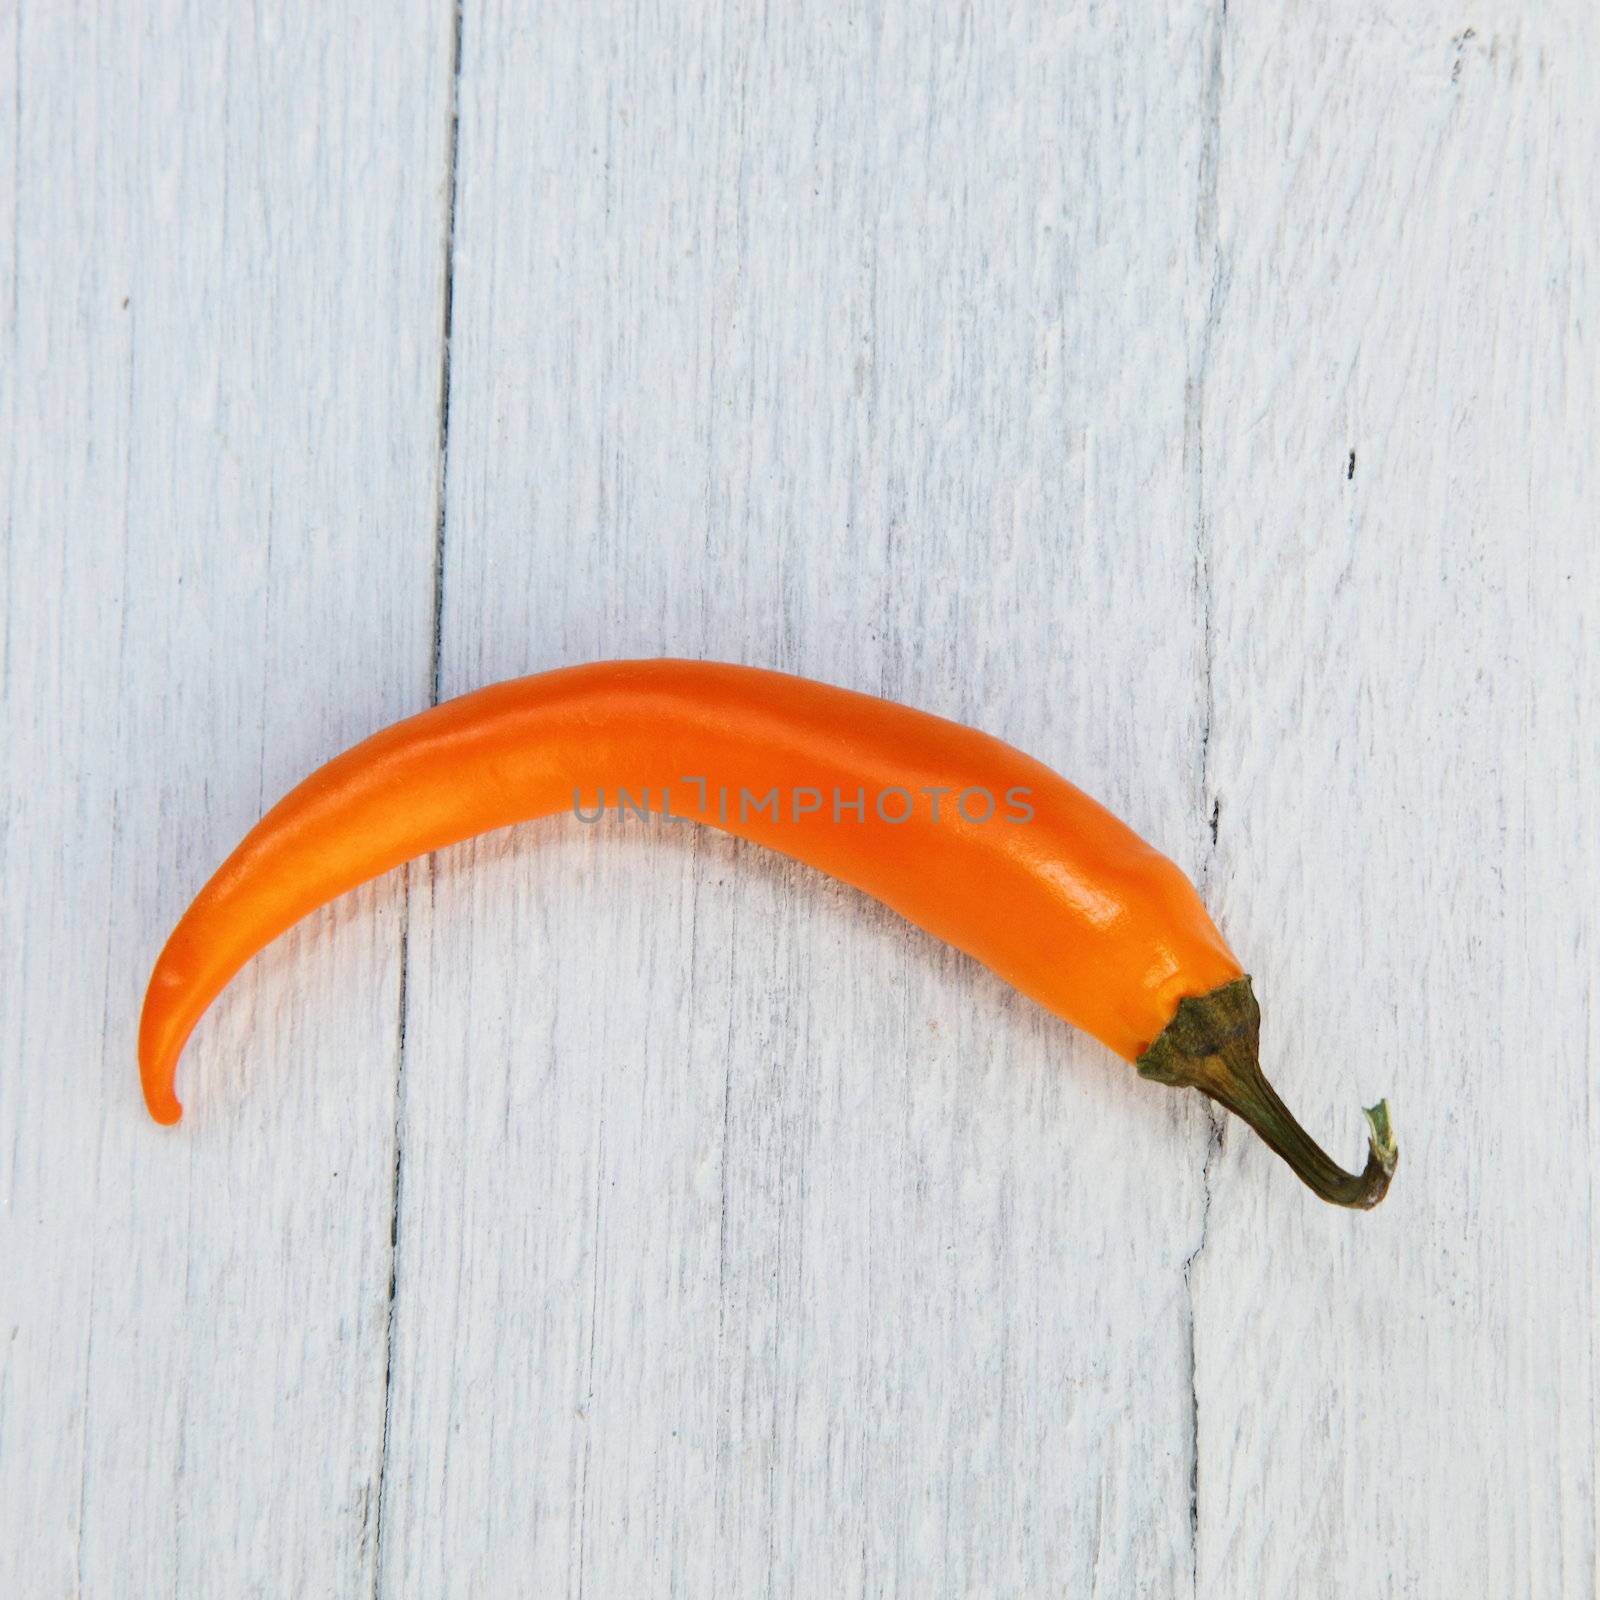 Single whole fresh crescent-shaped orange capsicum pepper used as a spice, flavouring and vegetable in cooking on a white painted rustic wooden plank